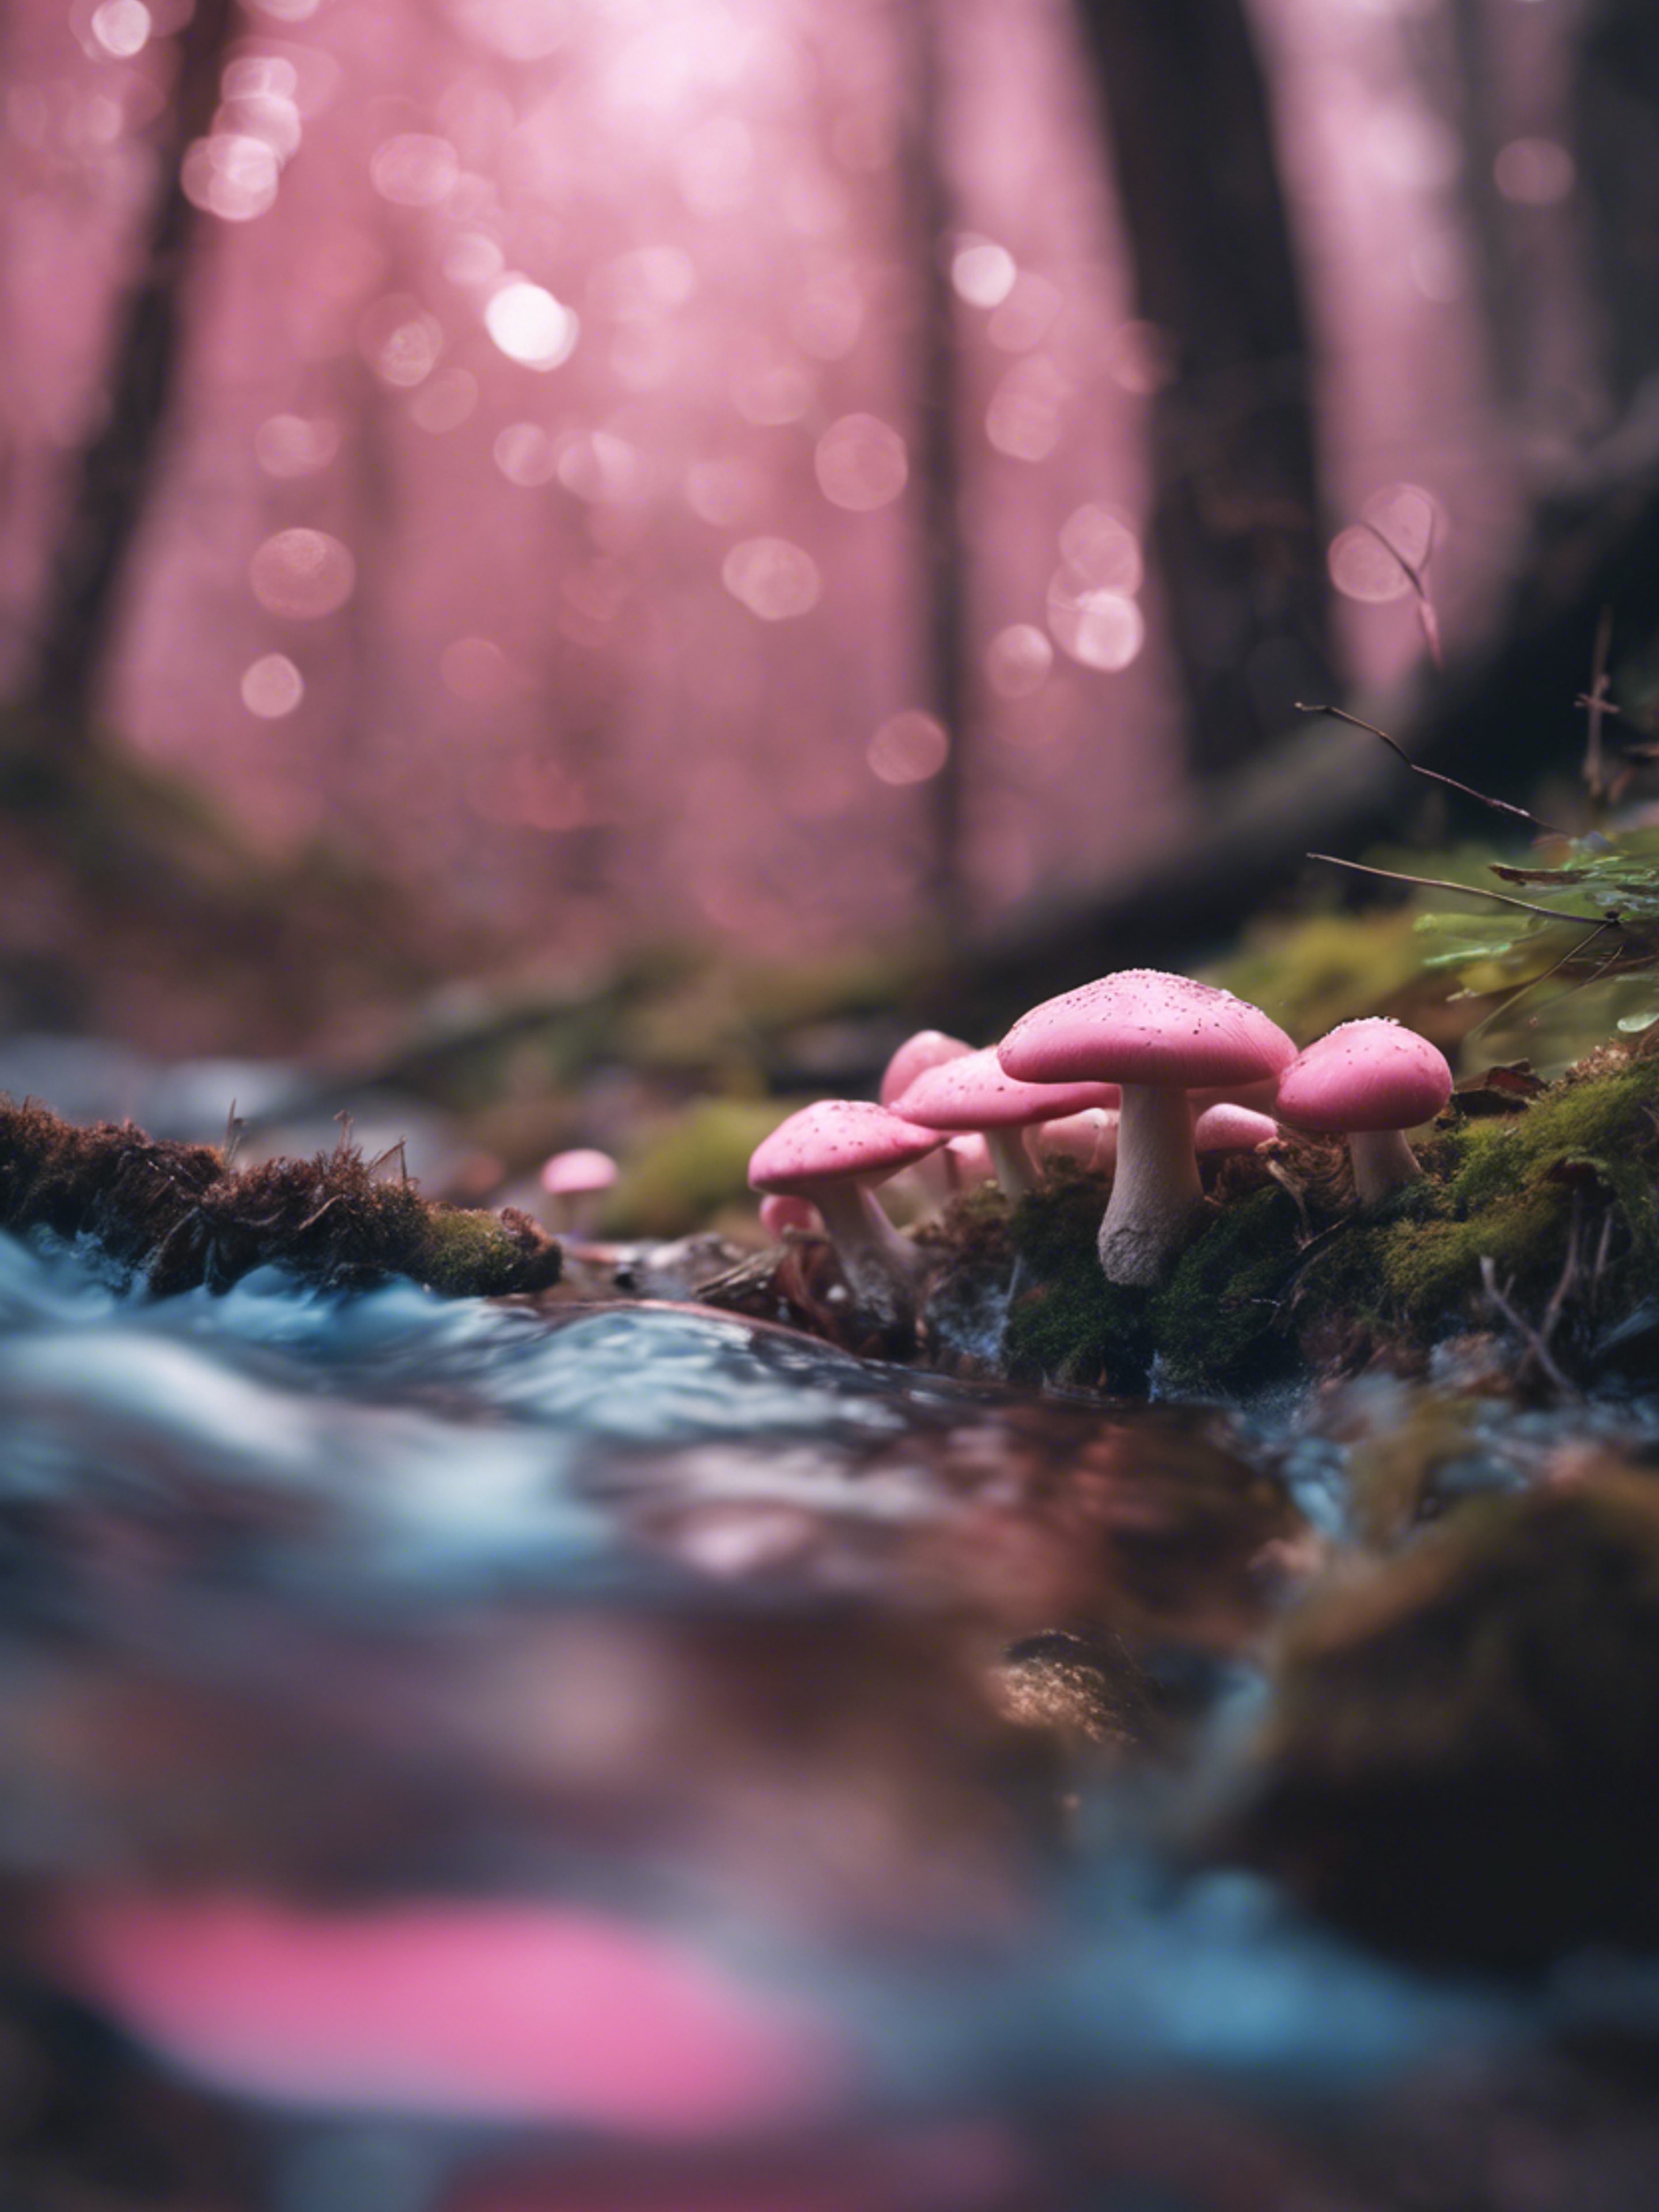 A scenic landscape of cute pink mushrooms growing next to a sparkling blue brook flowing through a mystic forest. Валлпапер[15649bdf42124ca6856a]